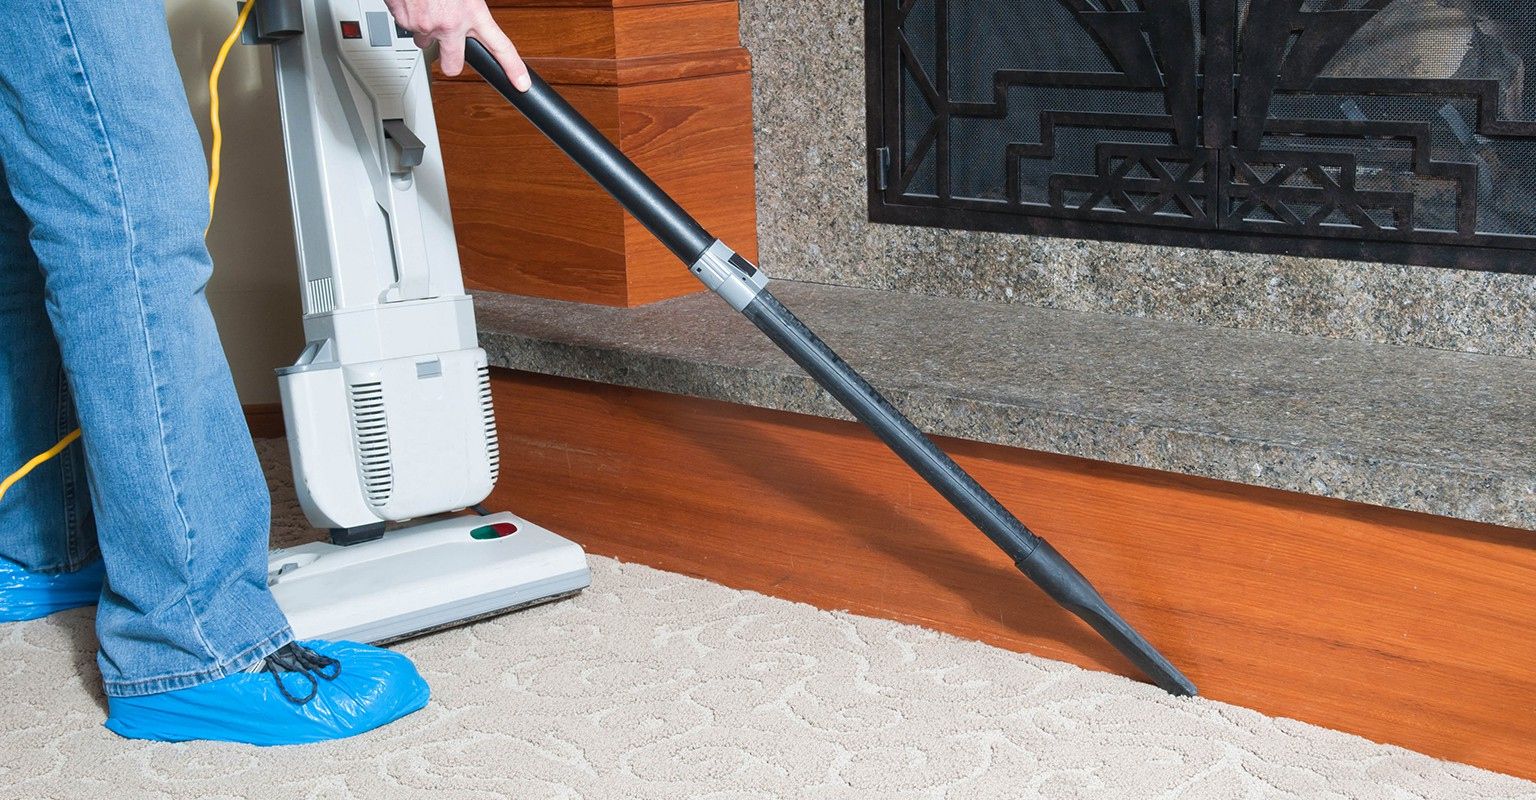 Cleaning Service For Home